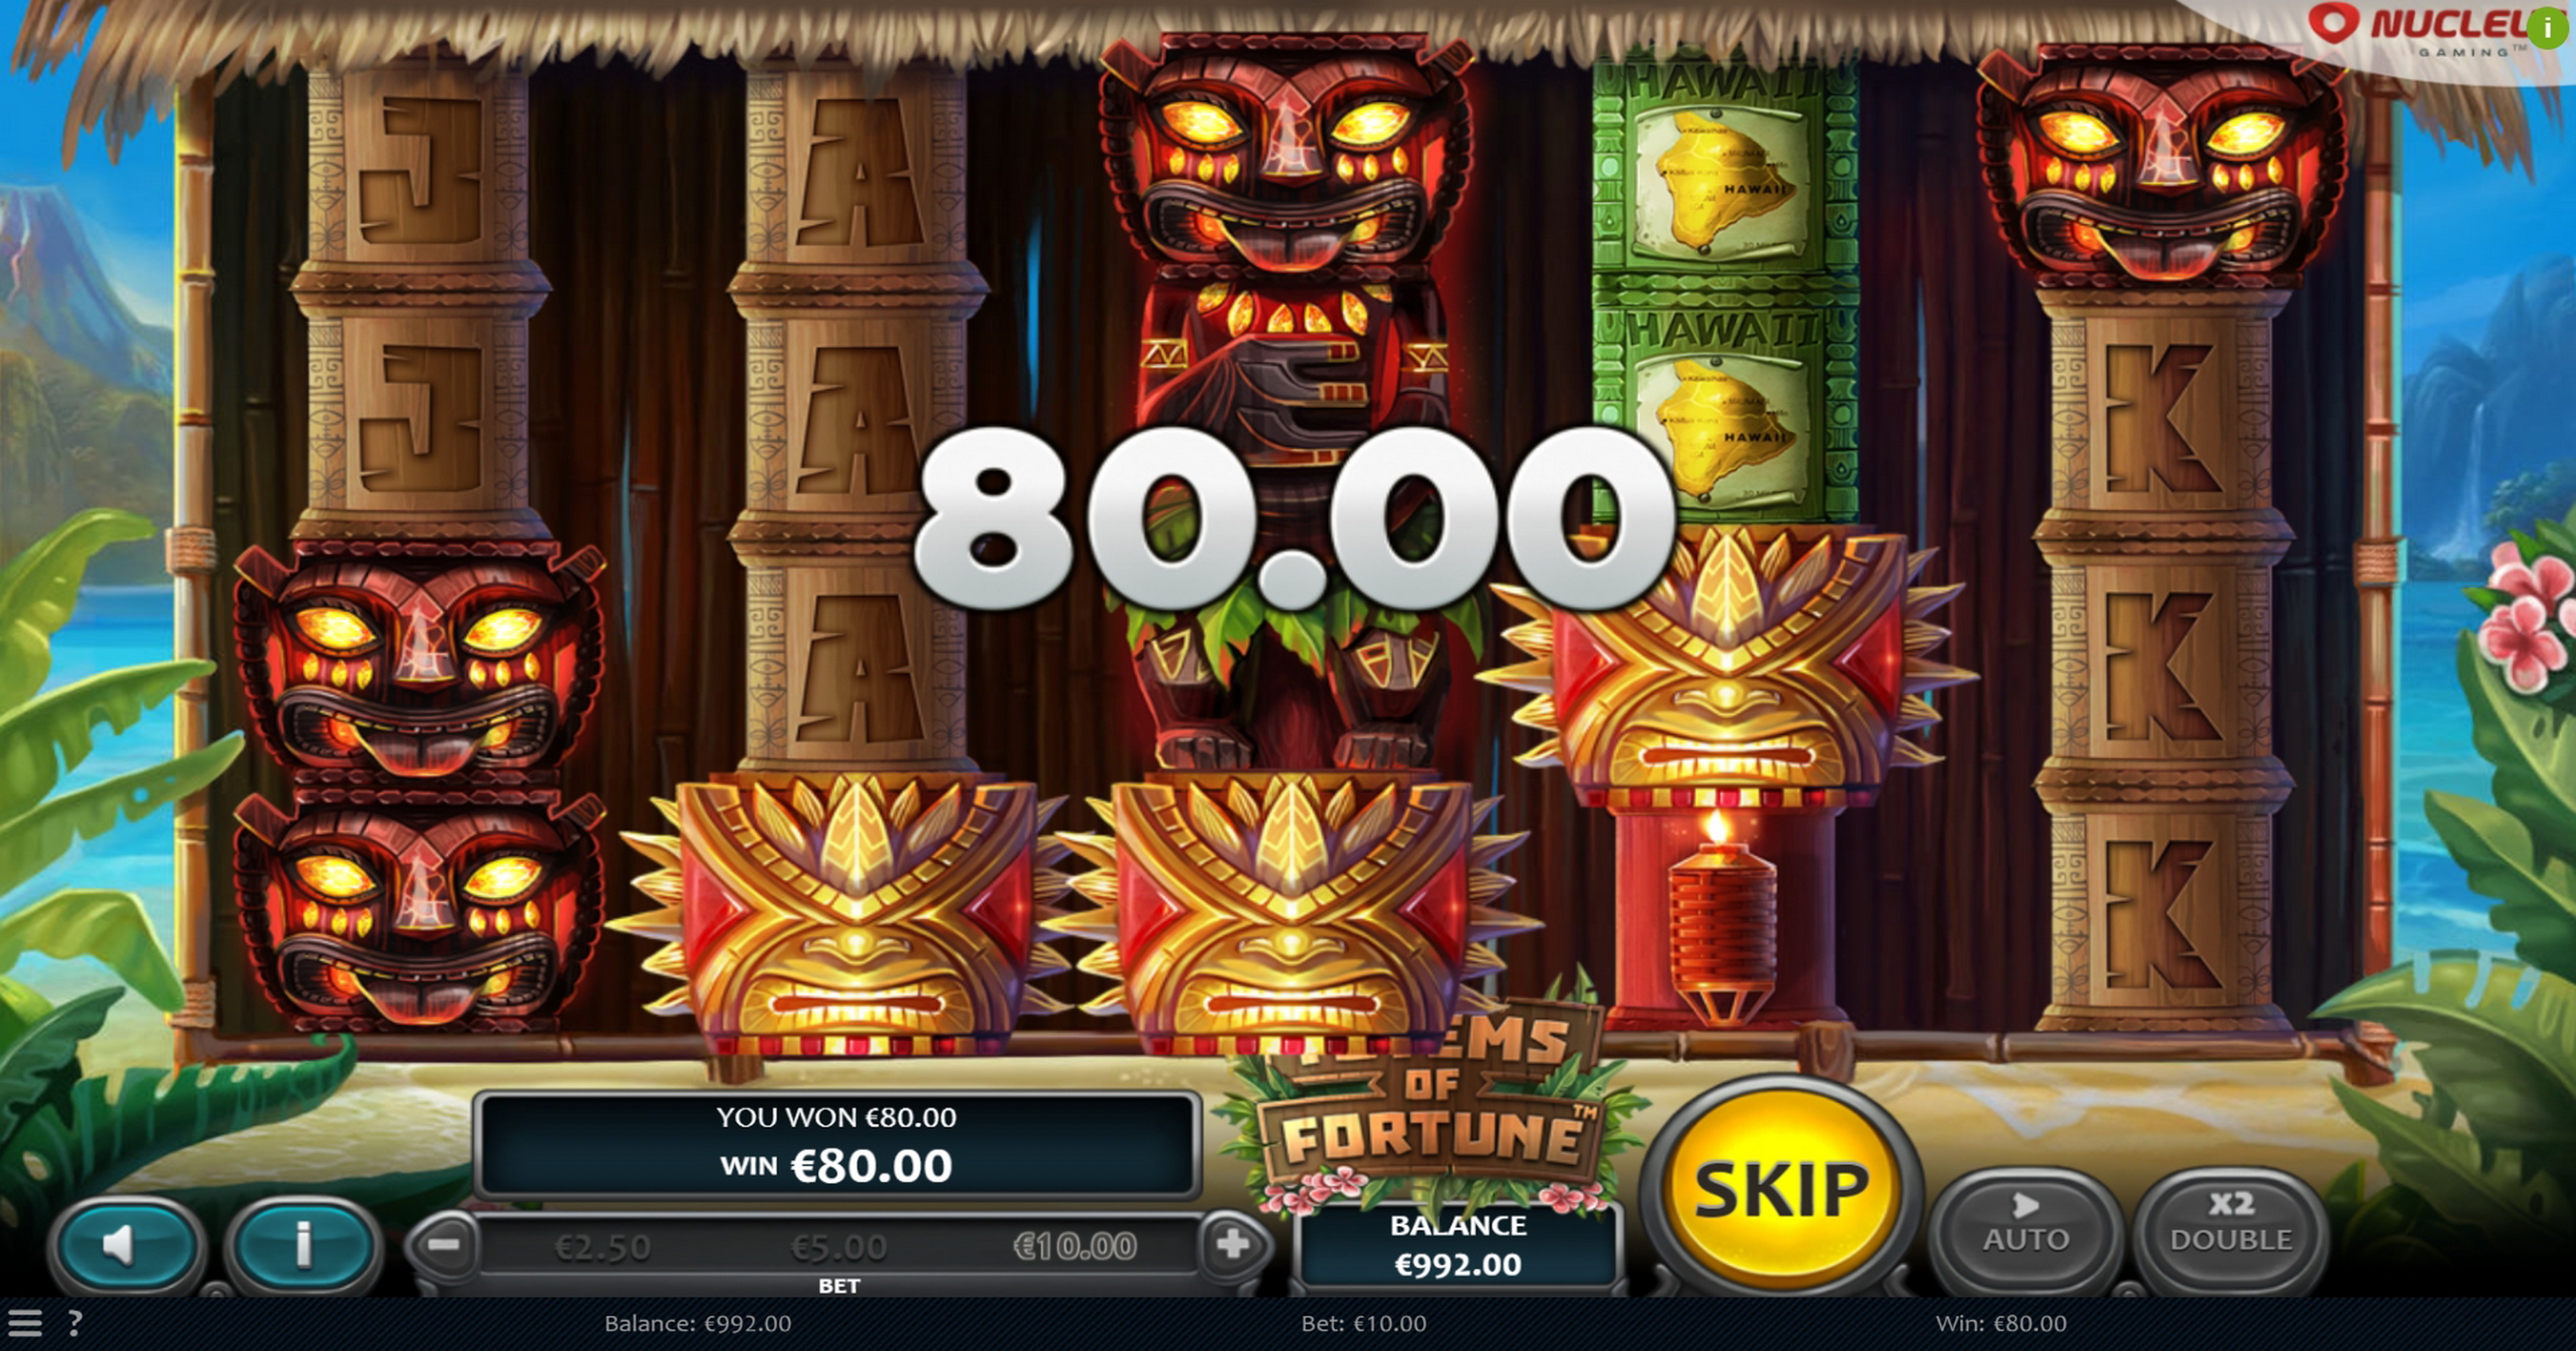 Win Money in Totems of Fortune Free Slot Game by Nucleus Gaming